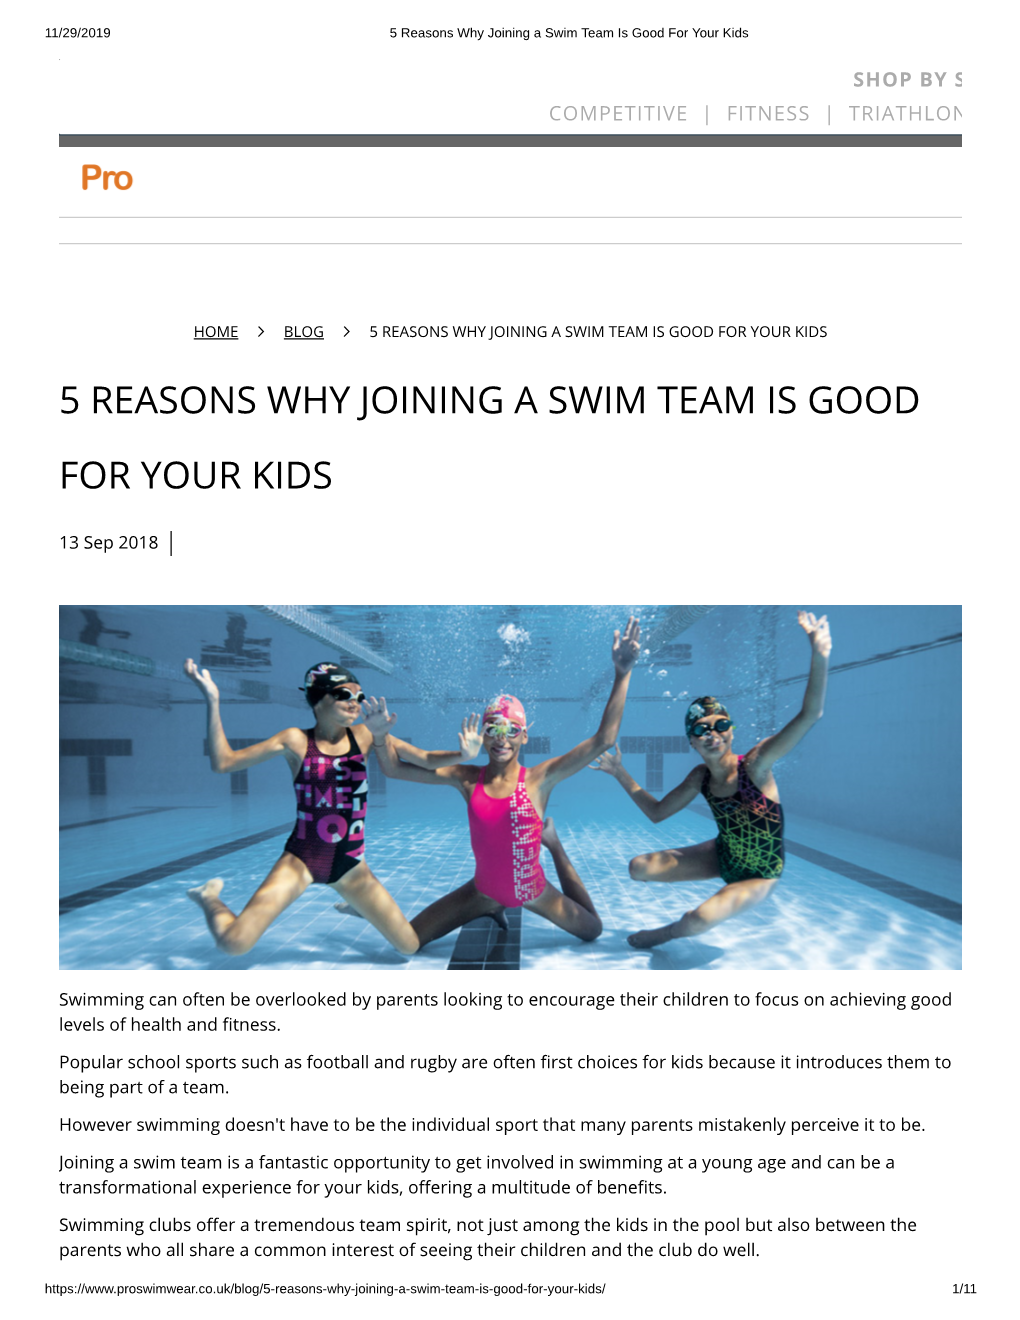 5 Reasons Why Joining a Swim Team Is Good for Your Kids